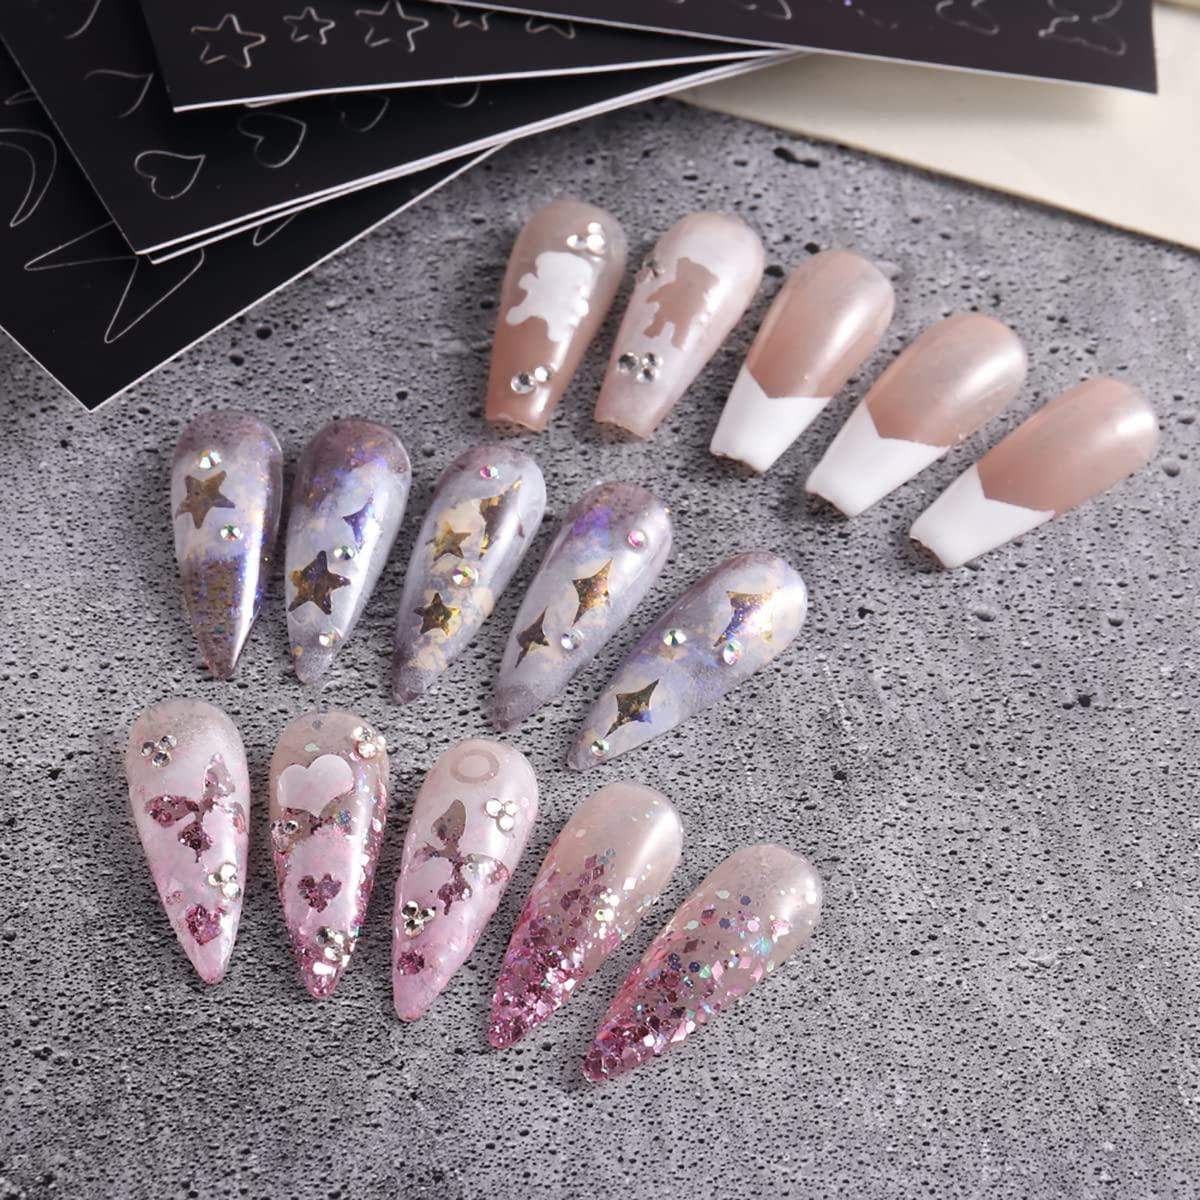  144Pcs Nail Vinyls Nail Art Stencil Sticker Set, 72 Designs of  French Nail Airbrush Stencils, Acrylic Hollow Dual-use Nail Art Stickers  DIY Manicure Decorative Supplies : Beauty & Personal Care